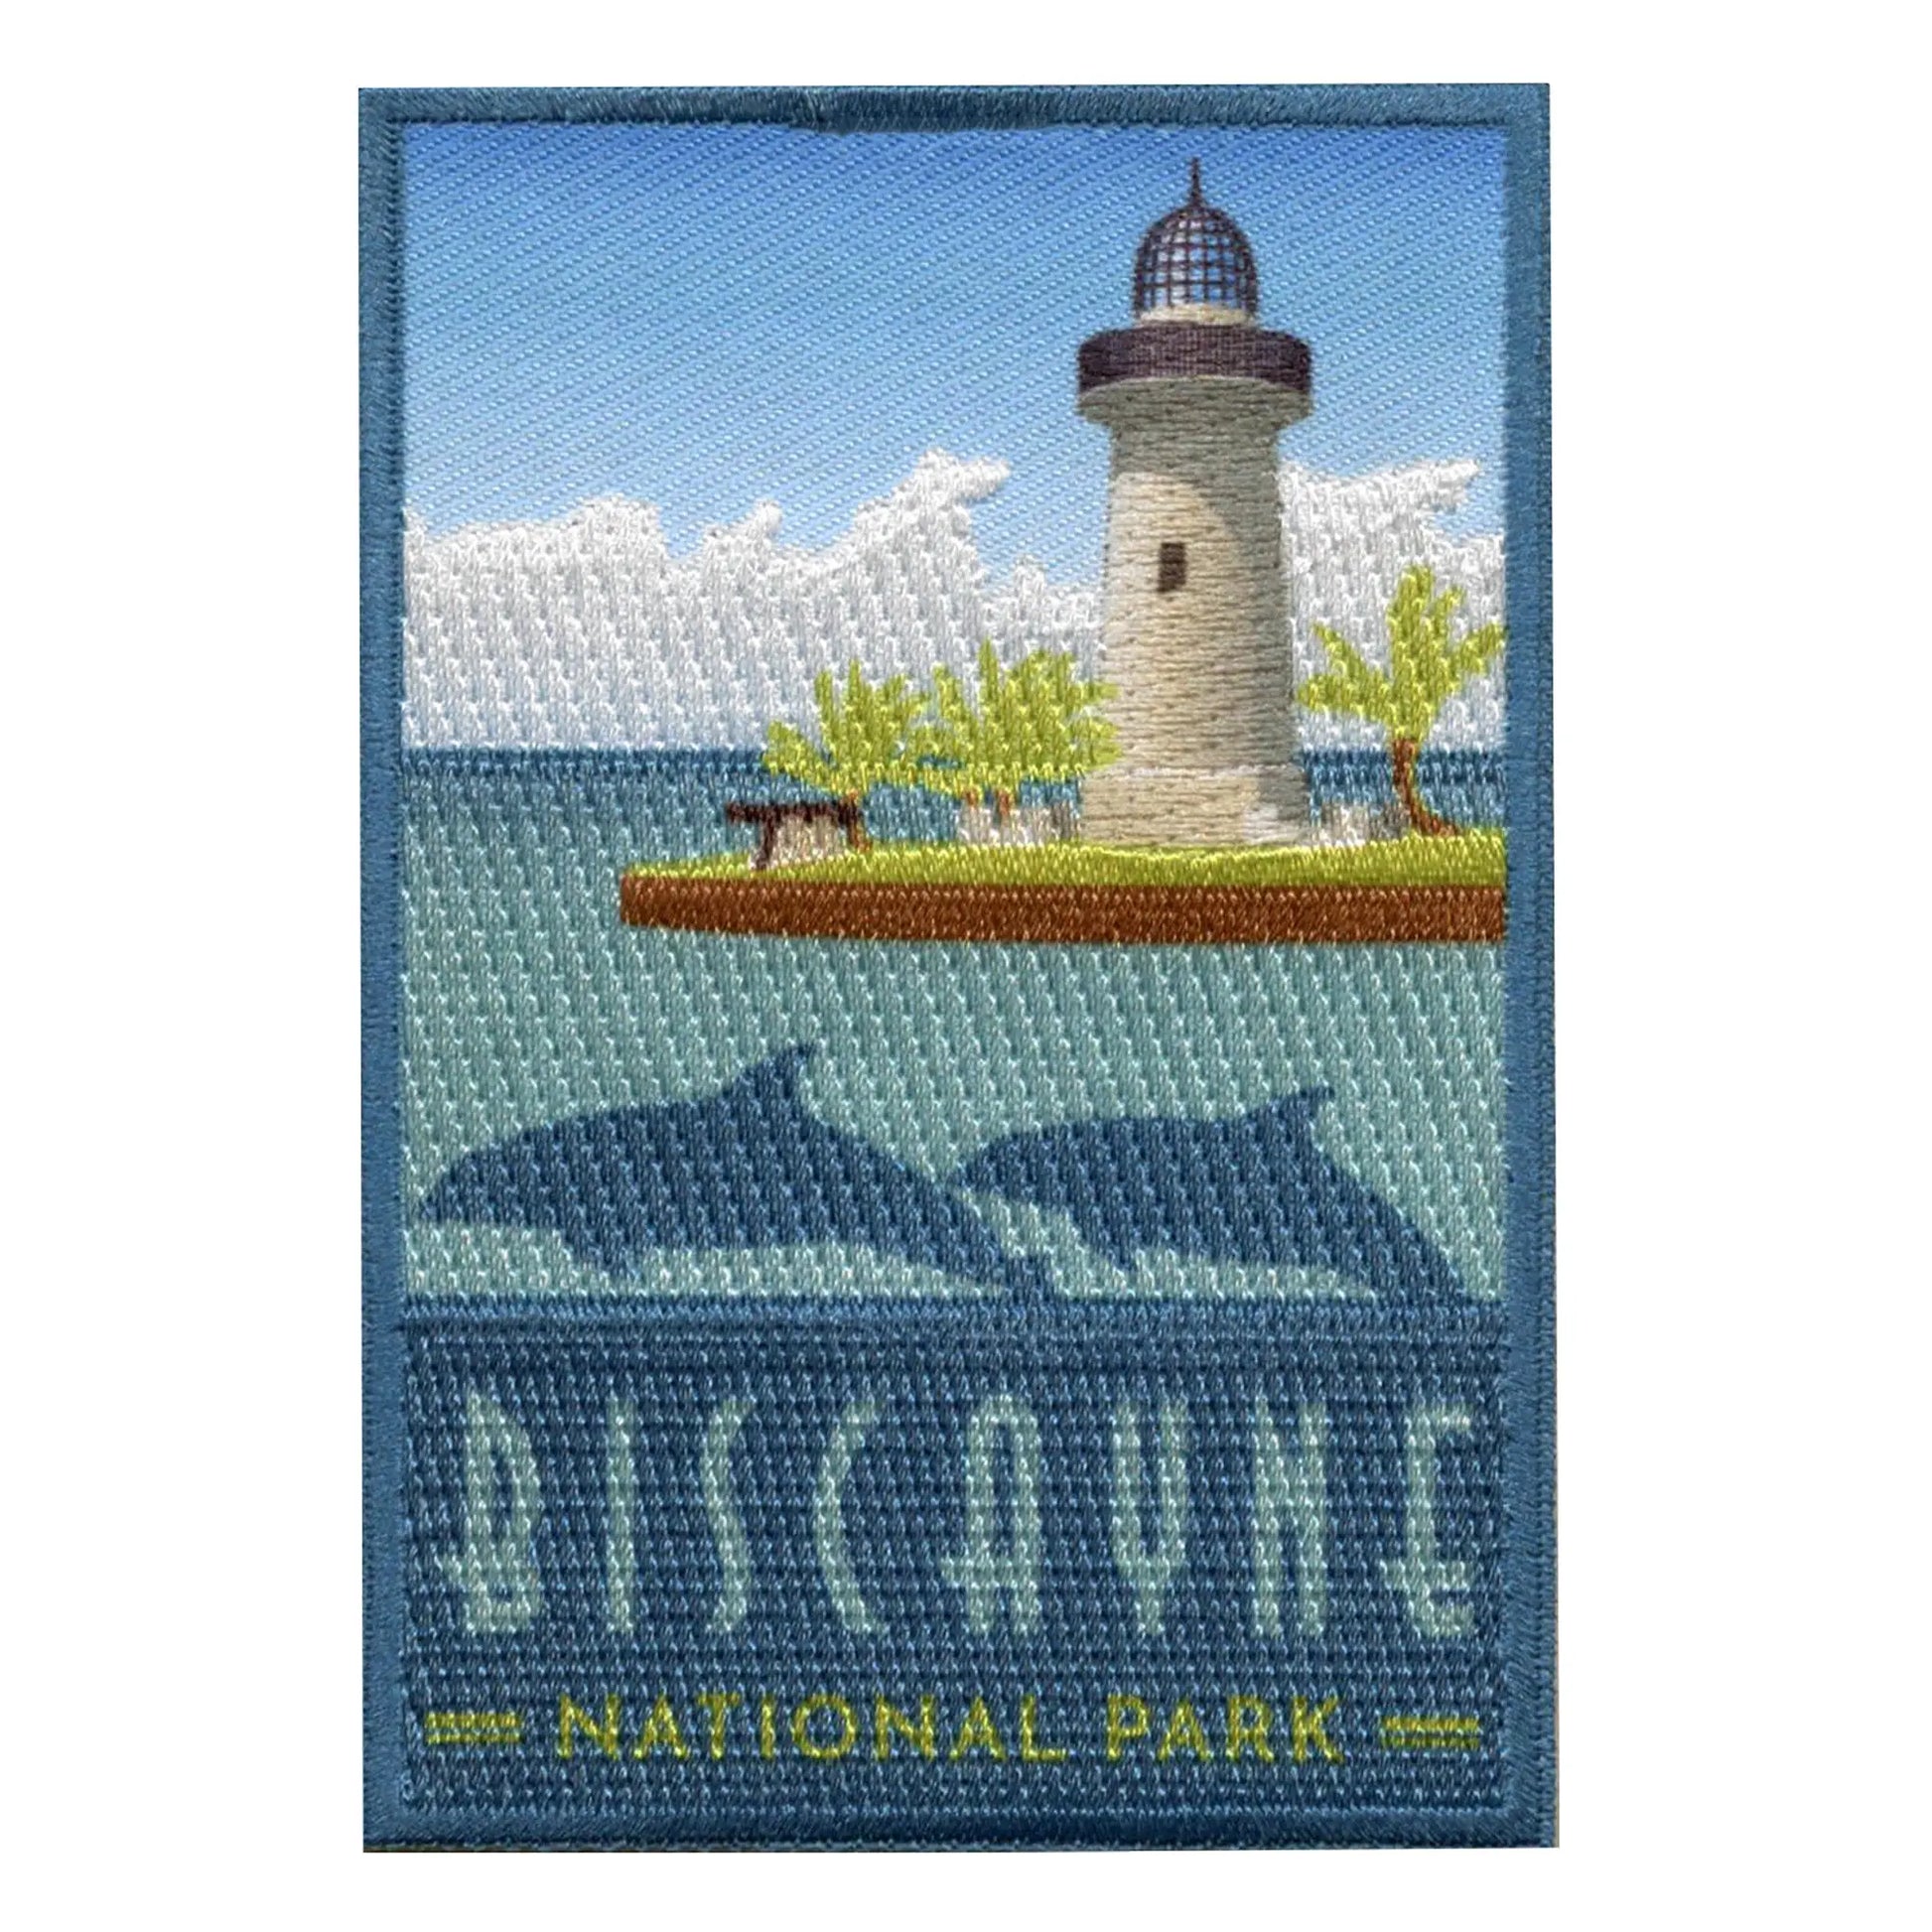 Biscayne National Park Patch Florida Miami Travel Sublimated Embroidery Iron On